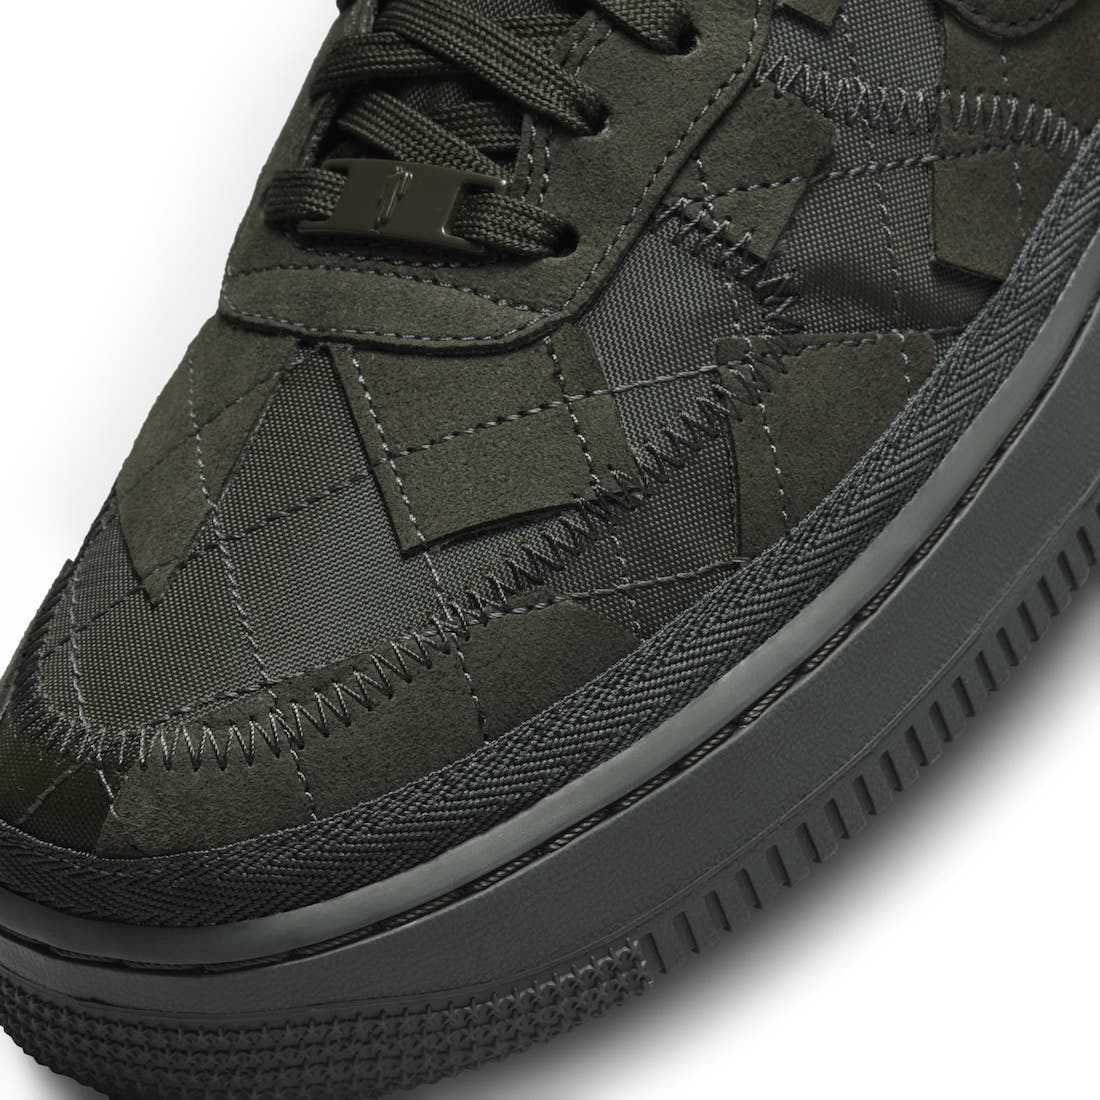 Billie Eilish Nike Air Force 1 Low Sequoia DQ4137-300 Release Date Price